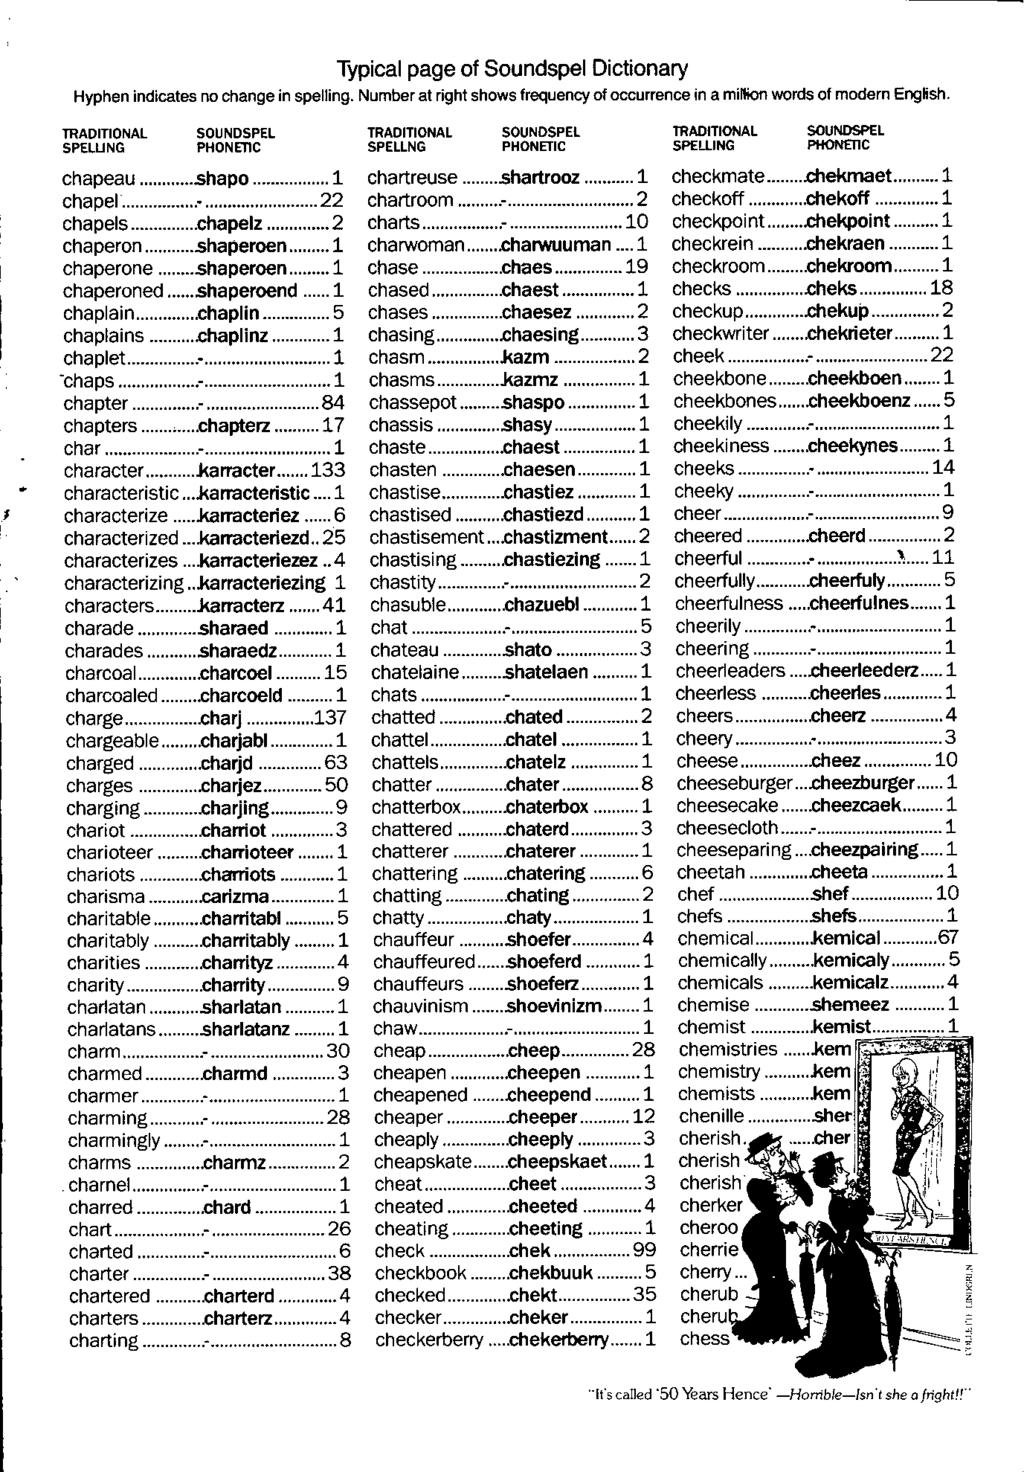 Typical page of Soundspel Dictionary Hyphen indicates no change in spelling. Number at right shows frequency of occurrence in a million words of modern English.